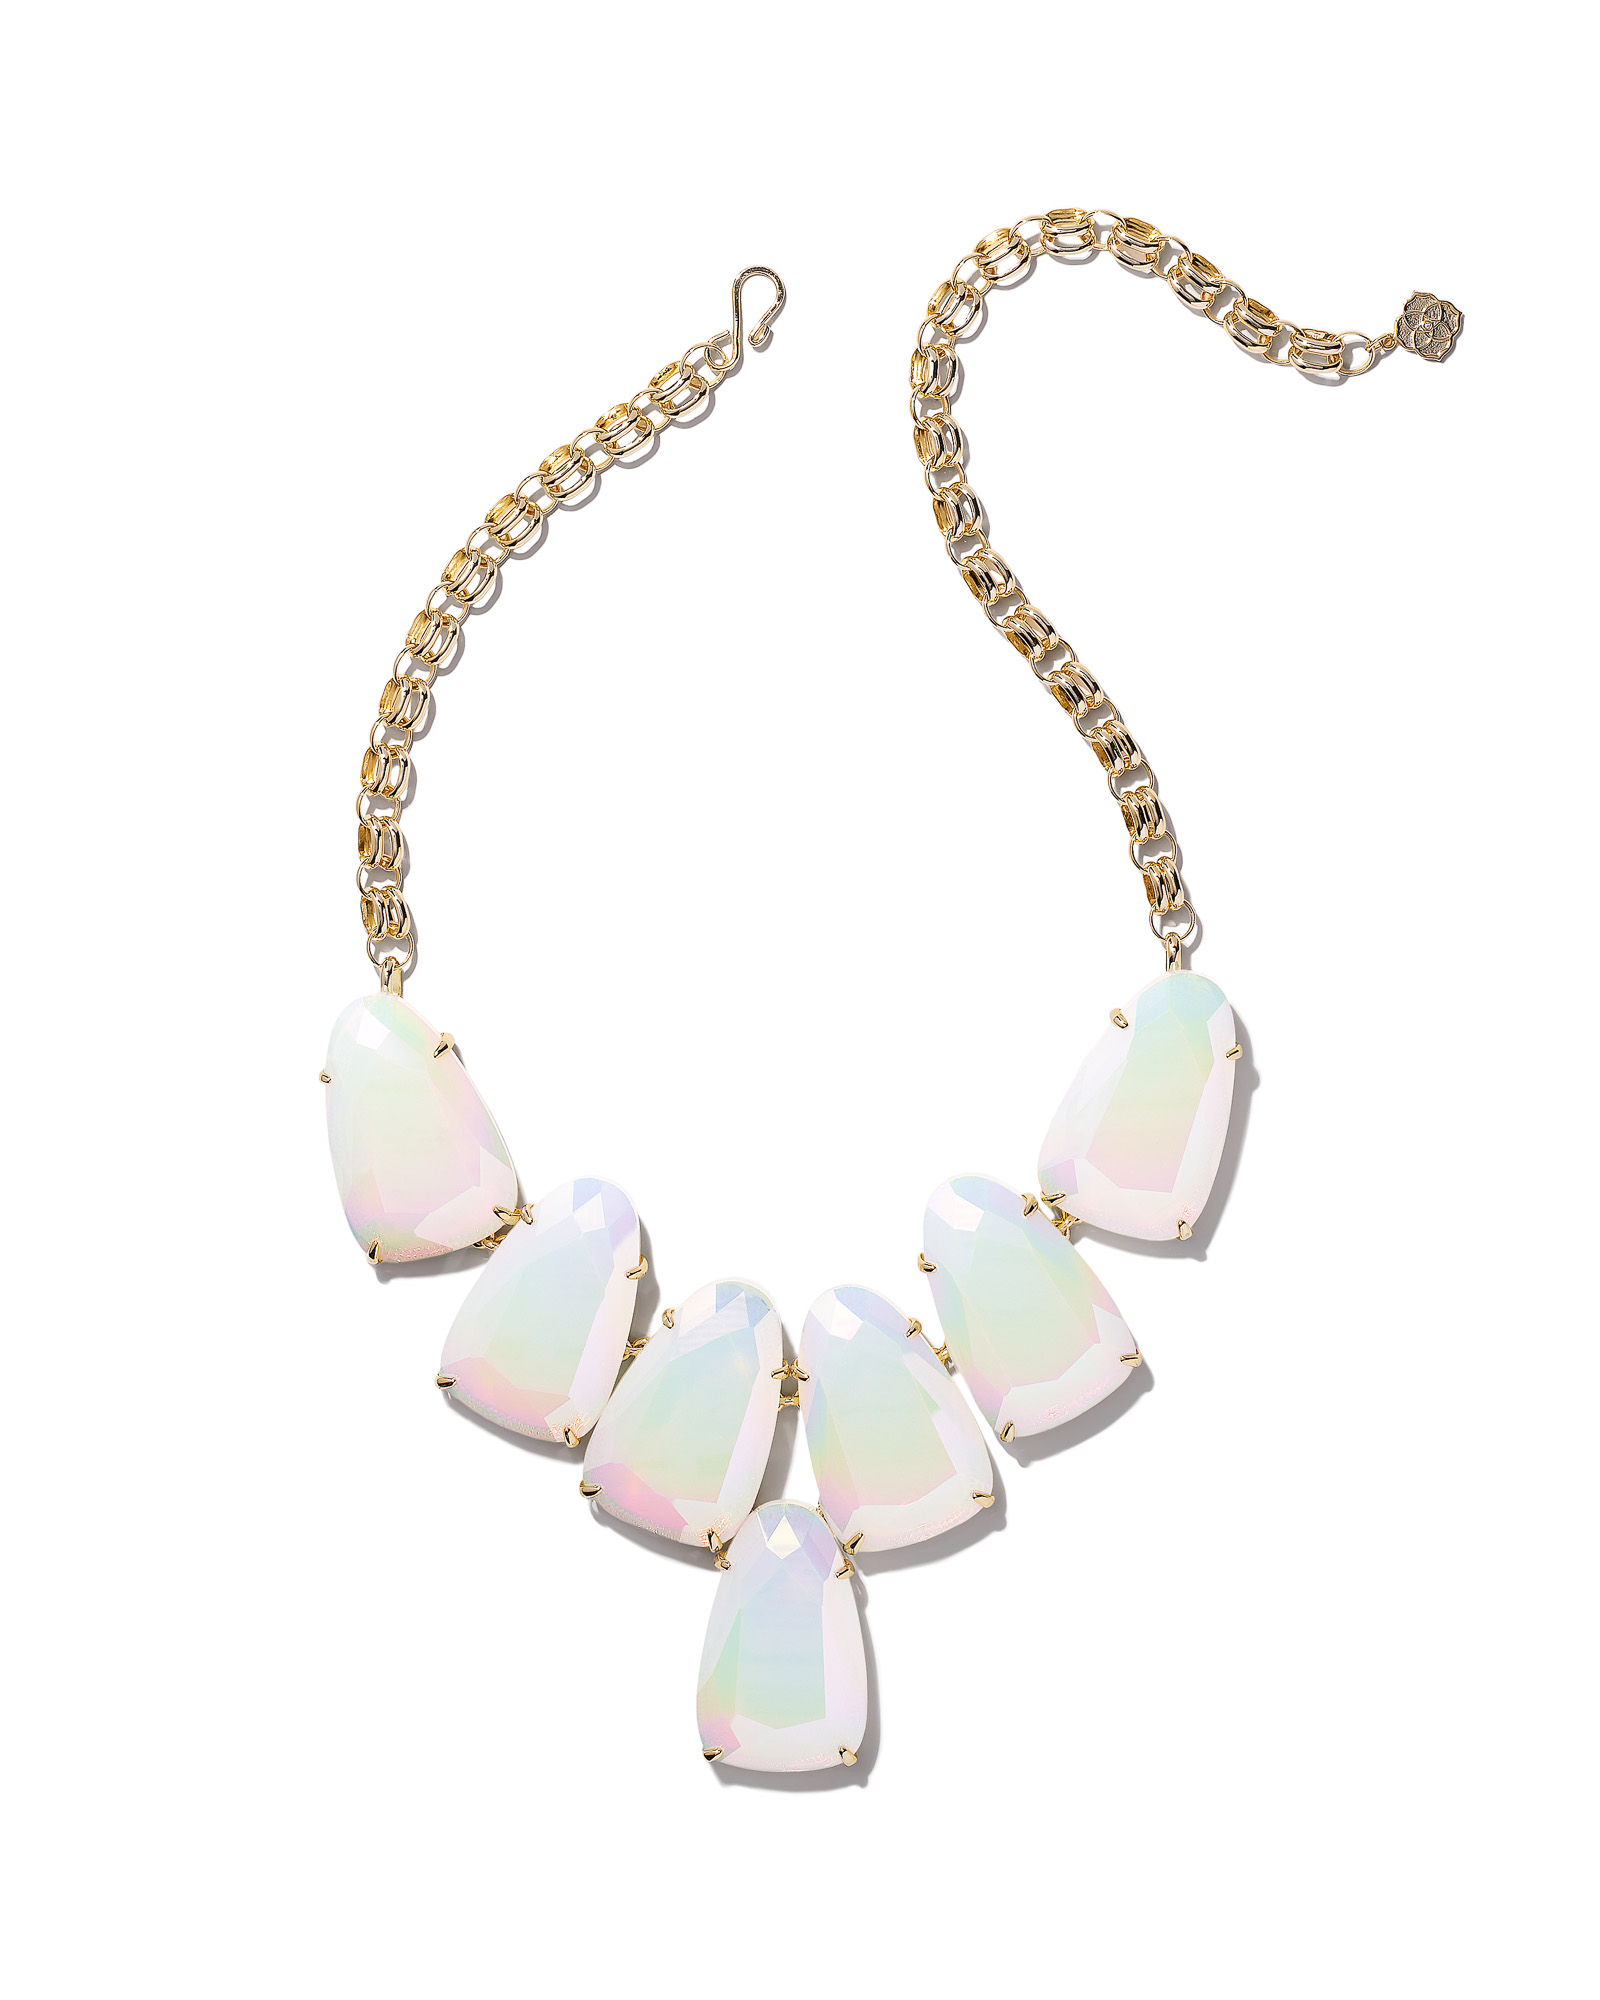 Emily Vintage Silver Statement Necklace in Variegated Turquoise Magnesite | Kendra  Scott